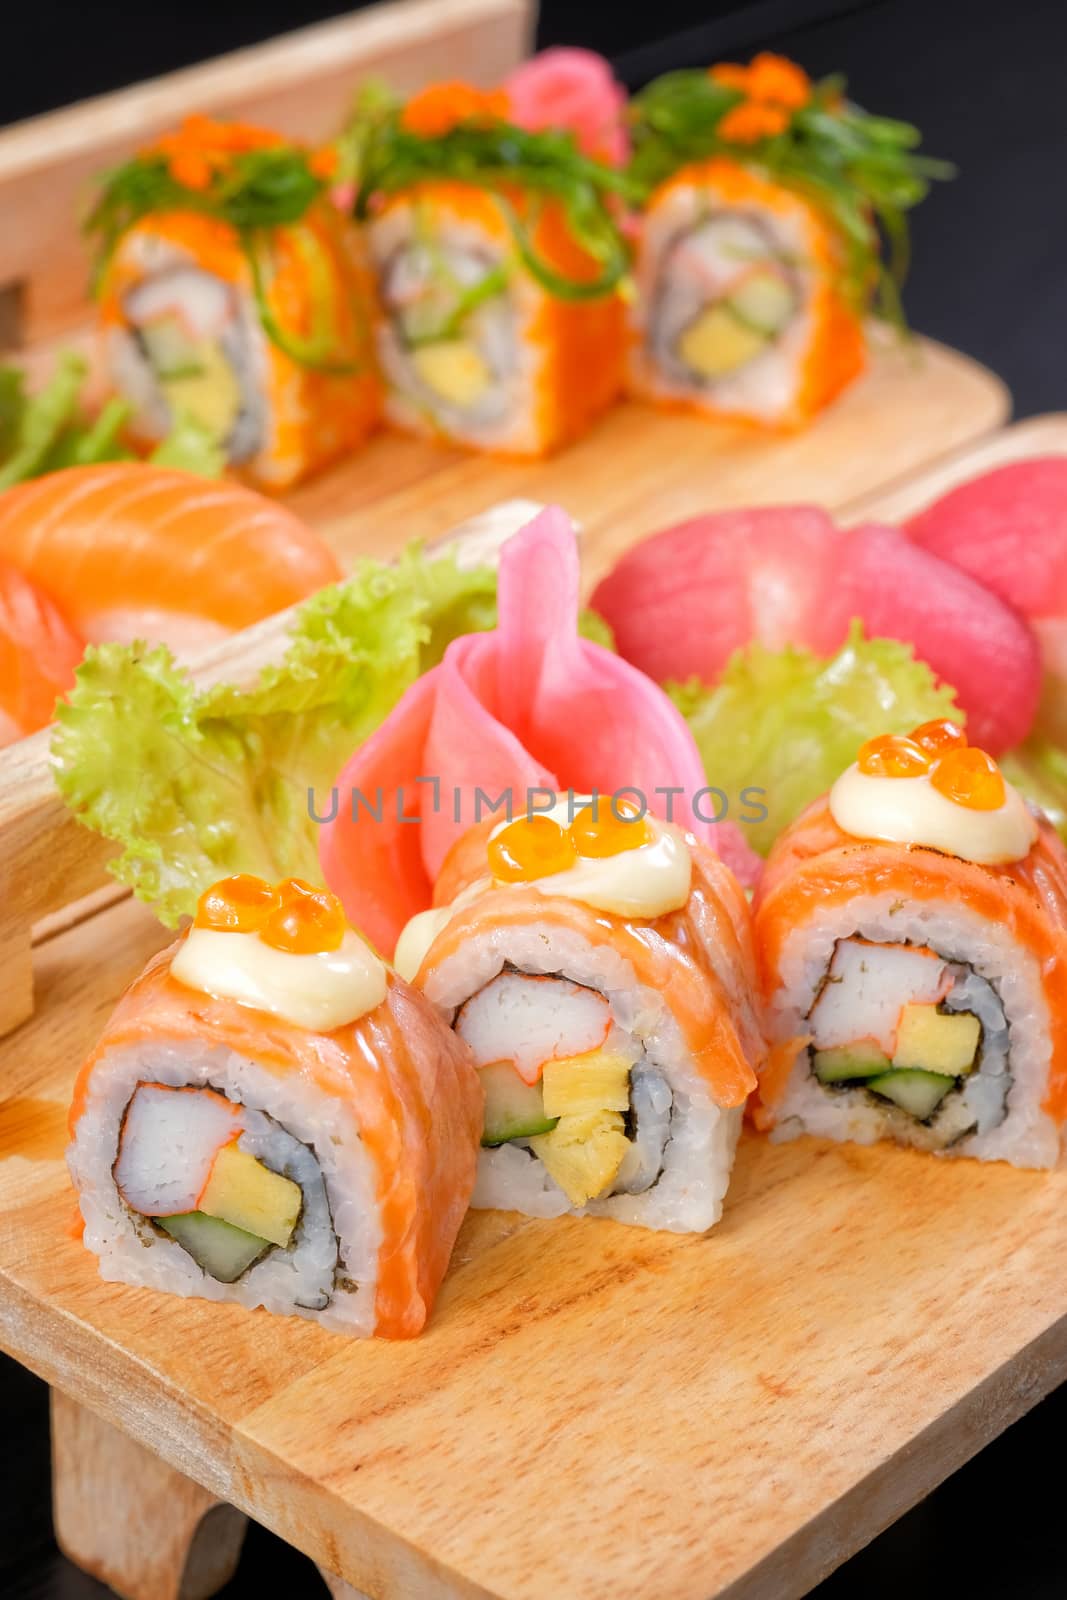 Japanese Cuisine - Sushi Roll on wood plate in black background